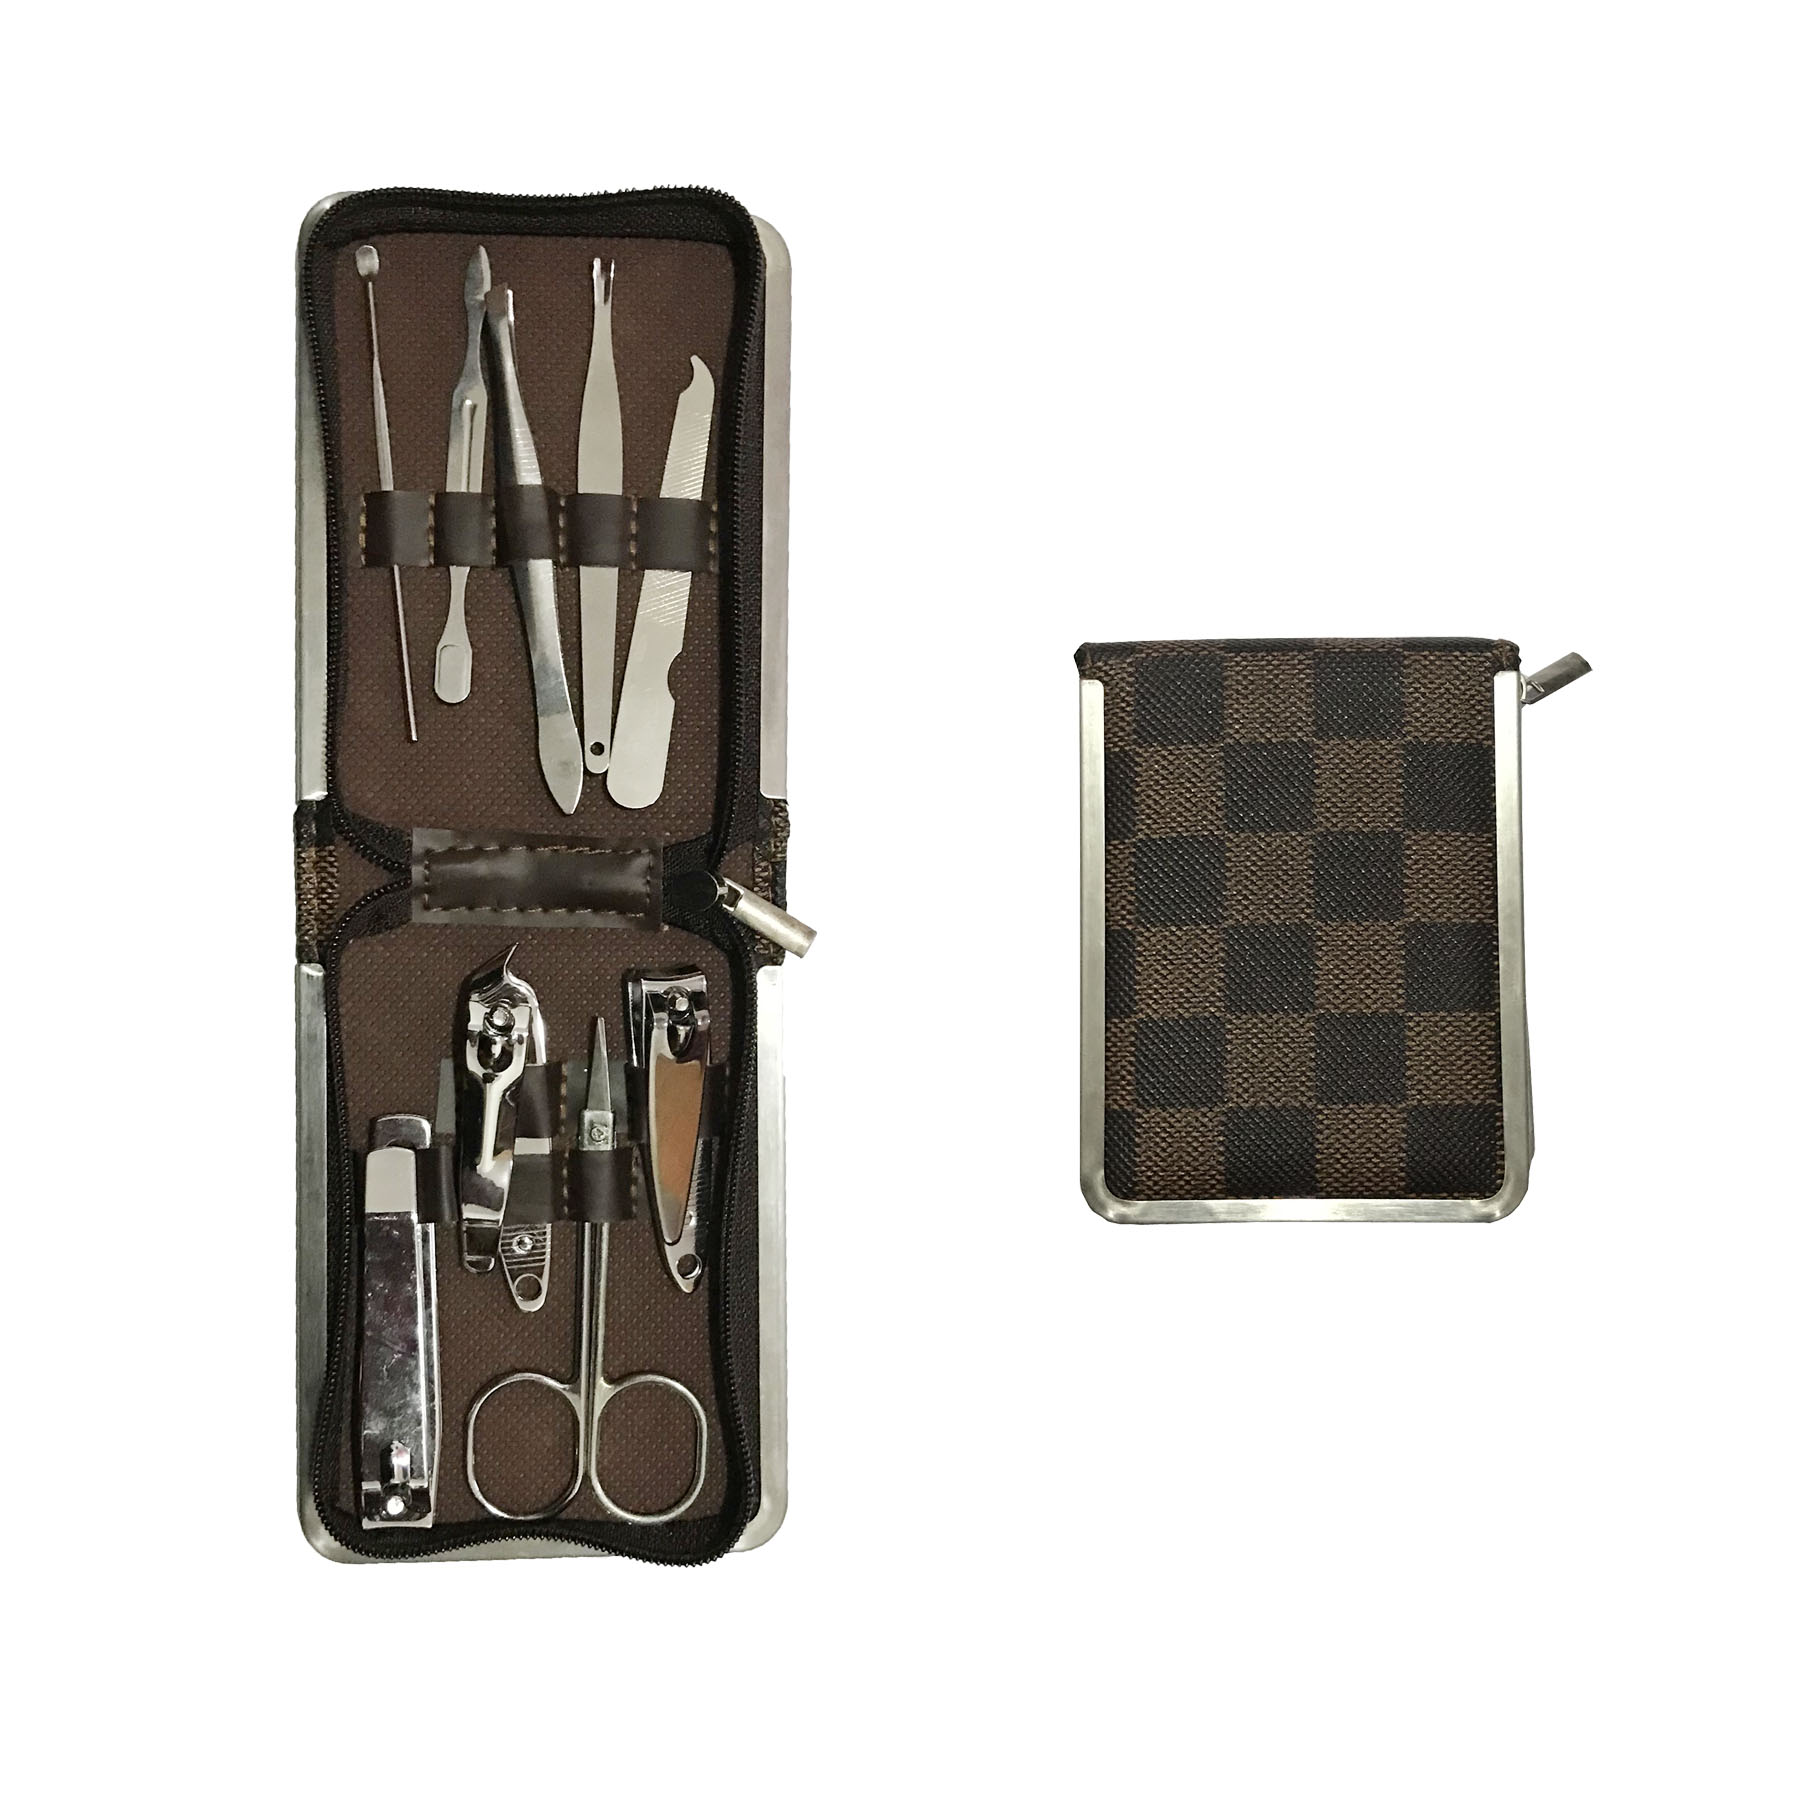 GL-AAA1498 Portable Travel Kit with Zipper Case